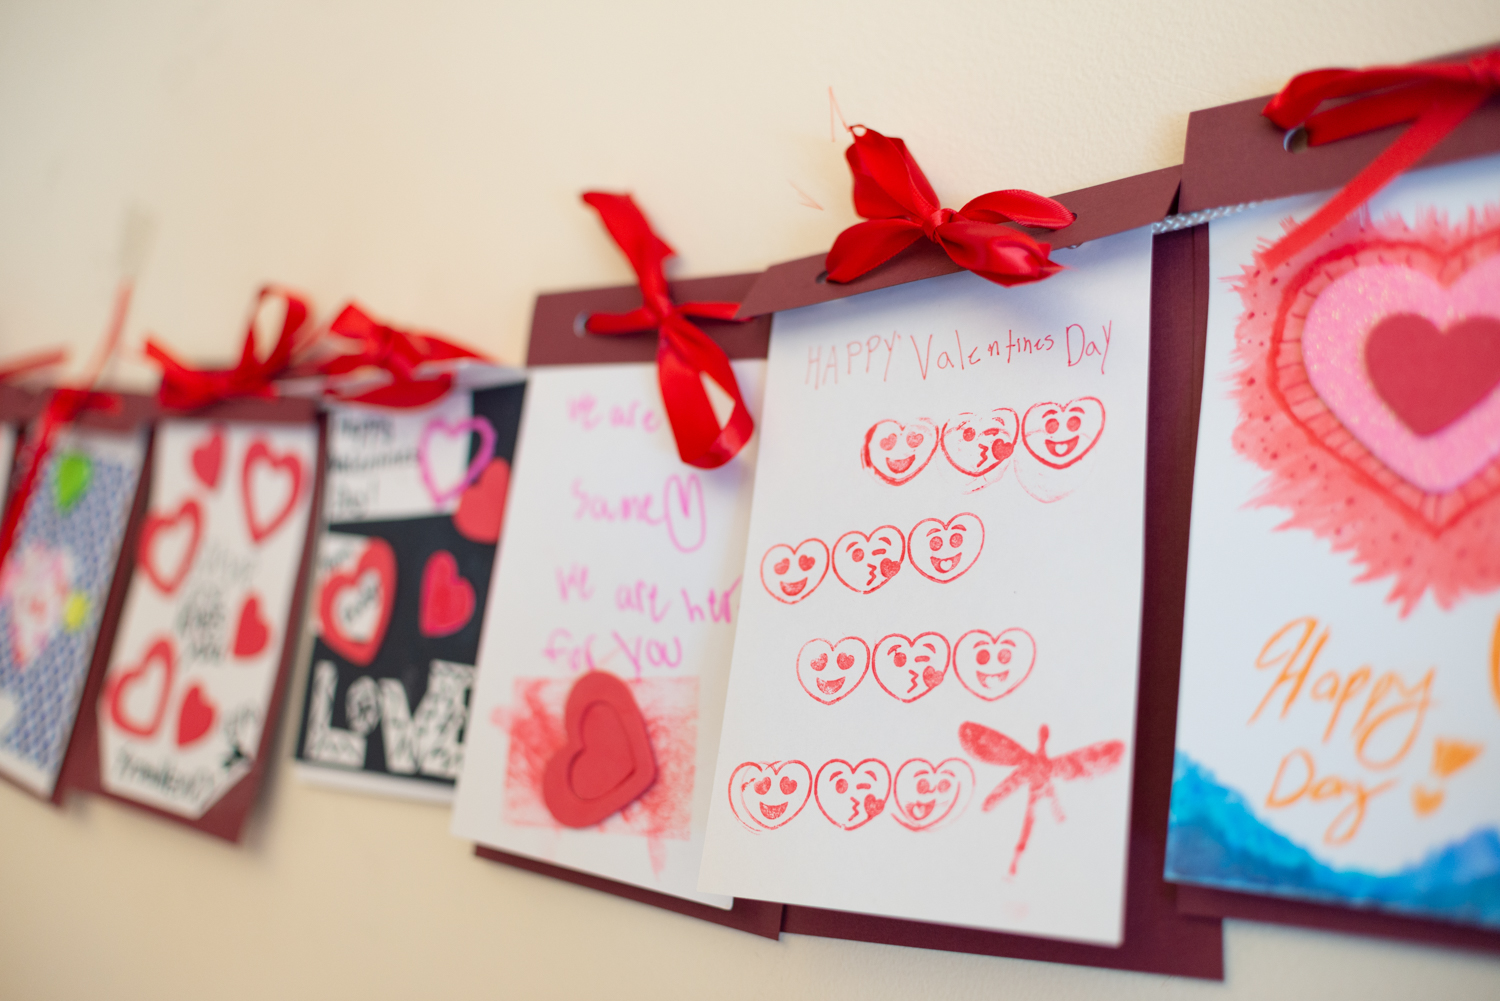 Valentine's Day cards strung up on a wall